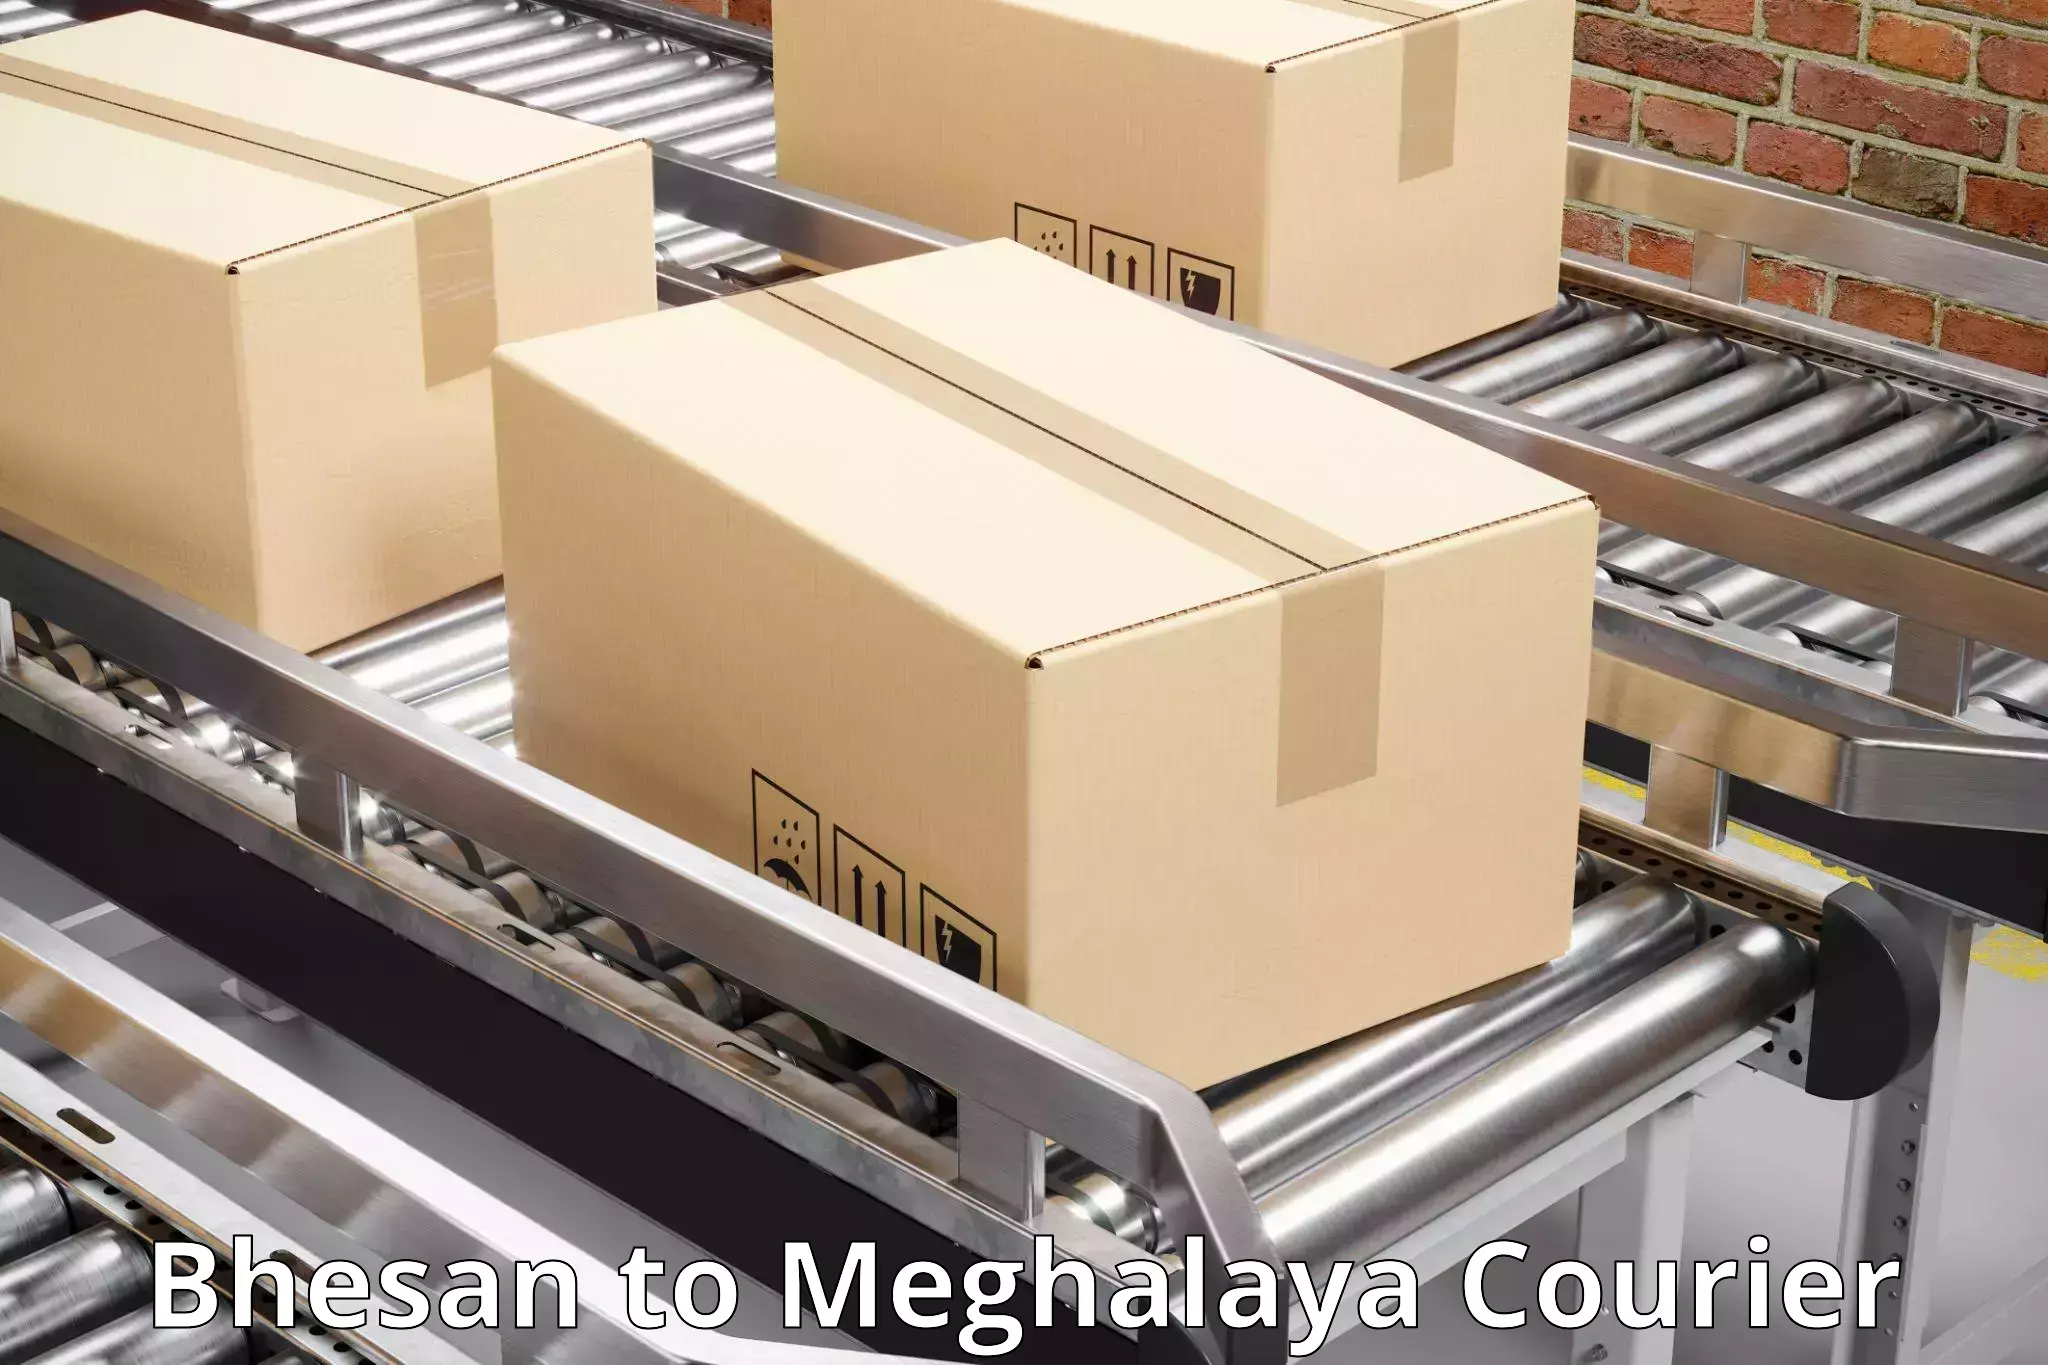 State-of-the-art courier technology Bhesan to Shillong